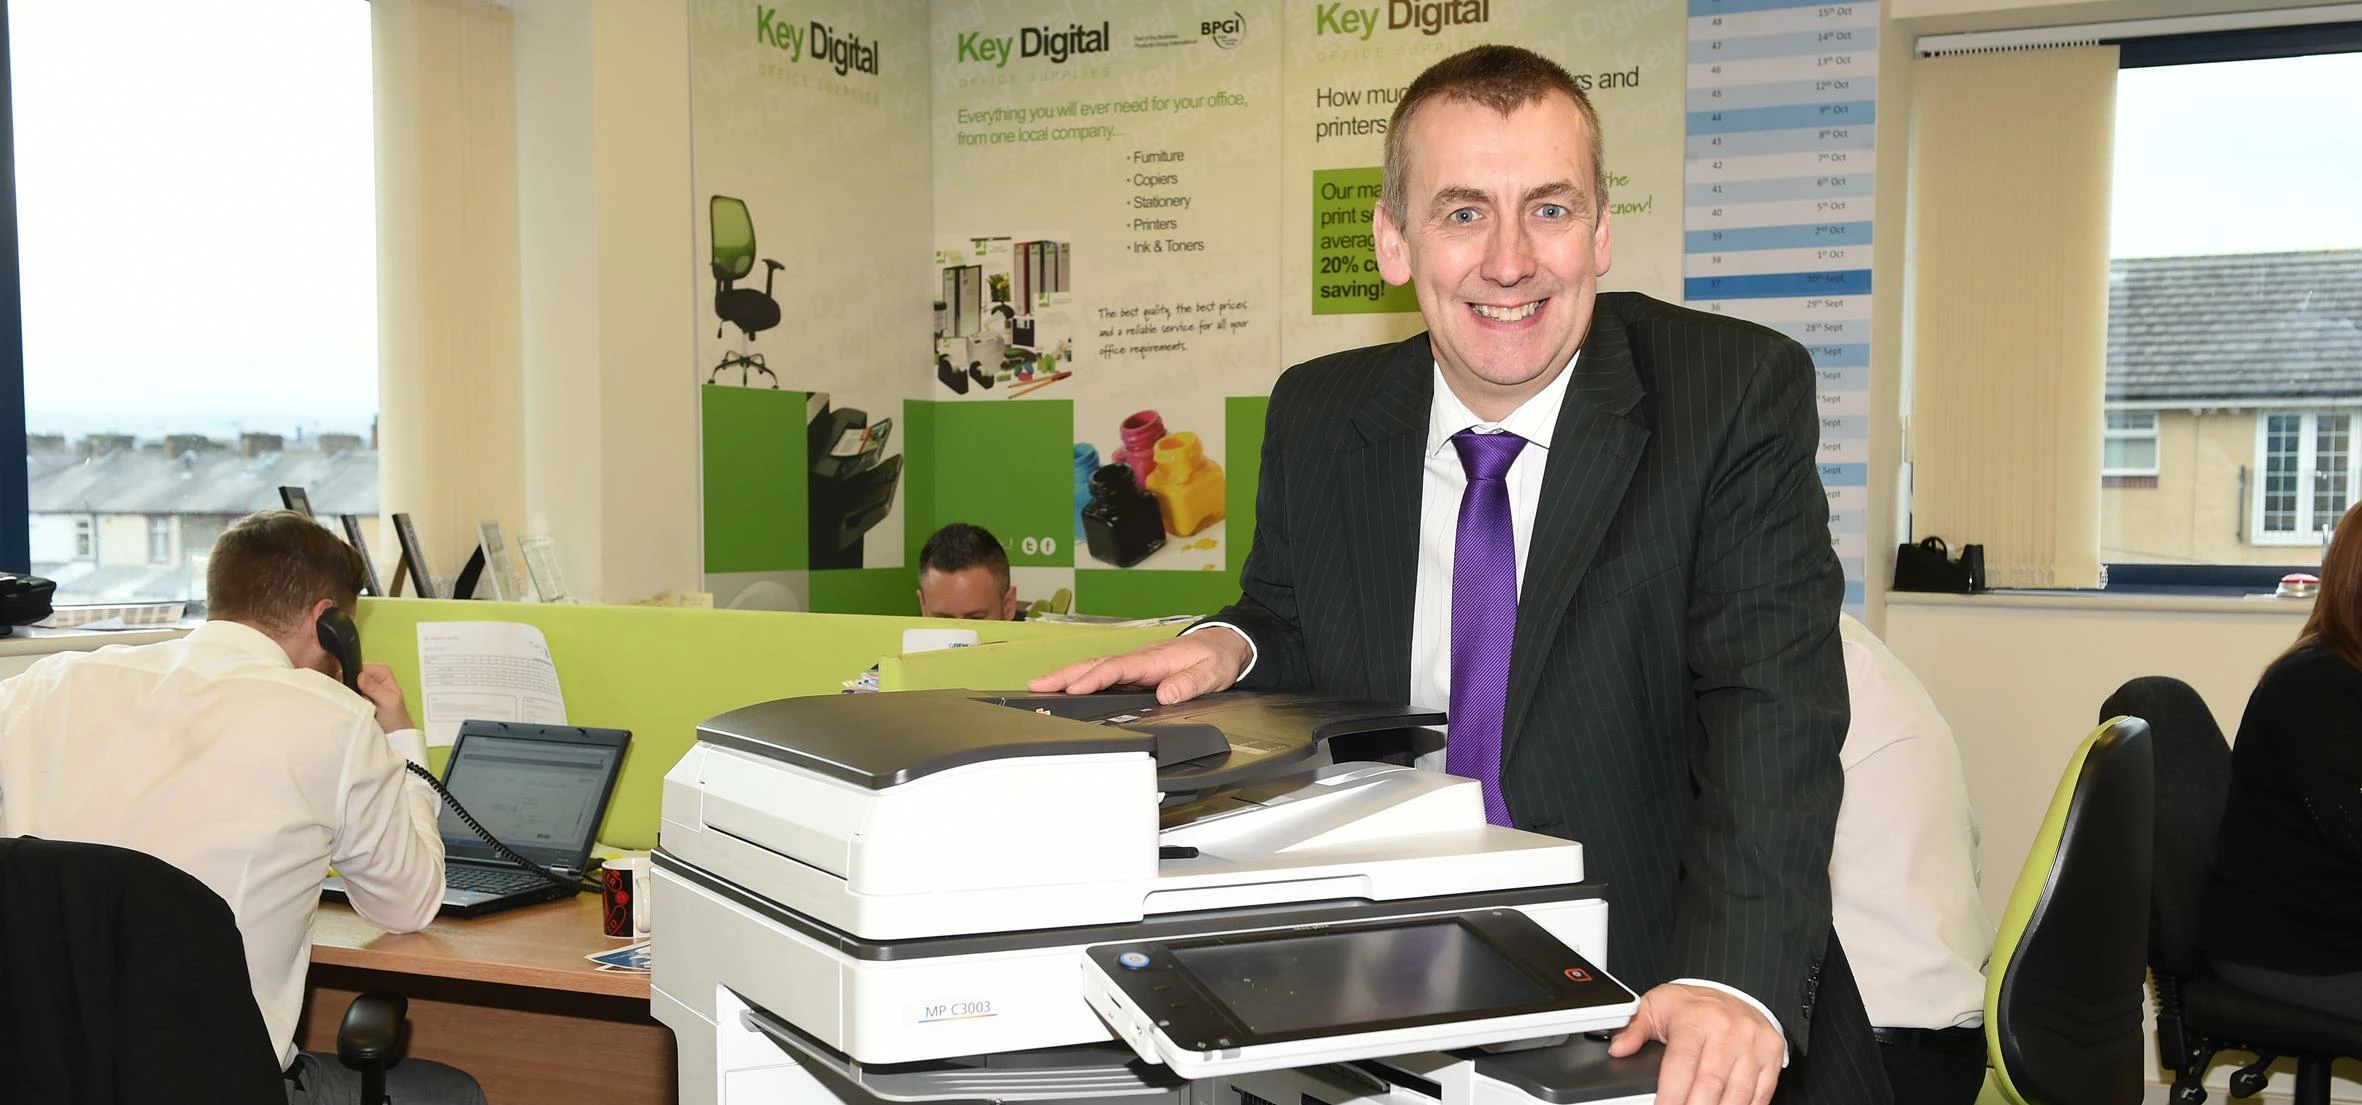 Andy Ratcliffe, managing director of Key Digital, has taken part in Boost Business Lancashire’s Grow